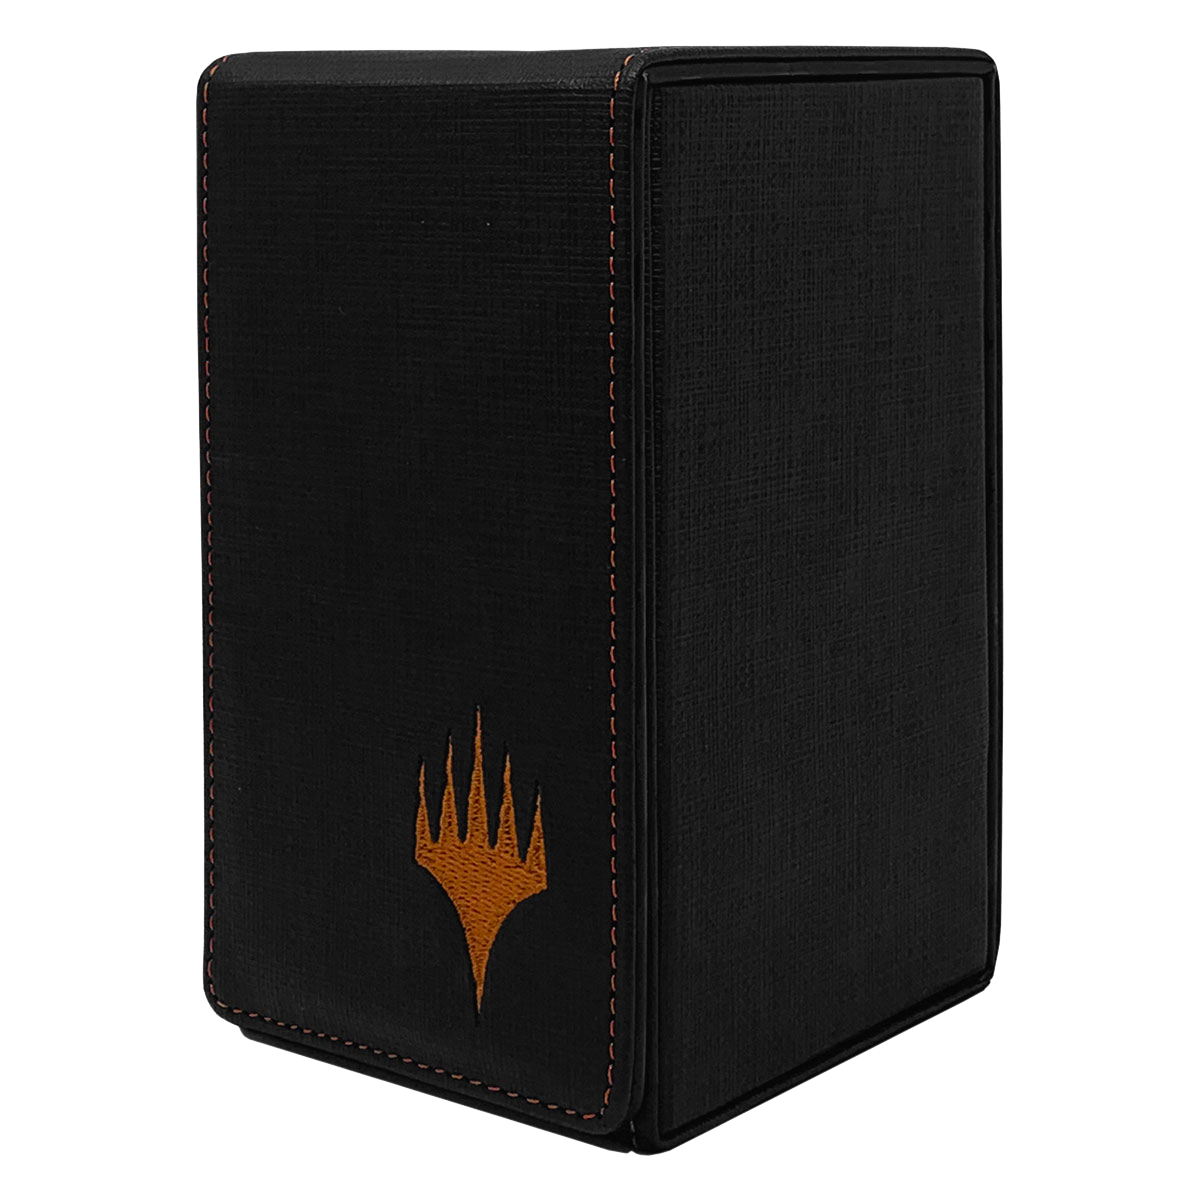 MAGIC: THE GATHERING - Alcove Tower - Mythic Edition